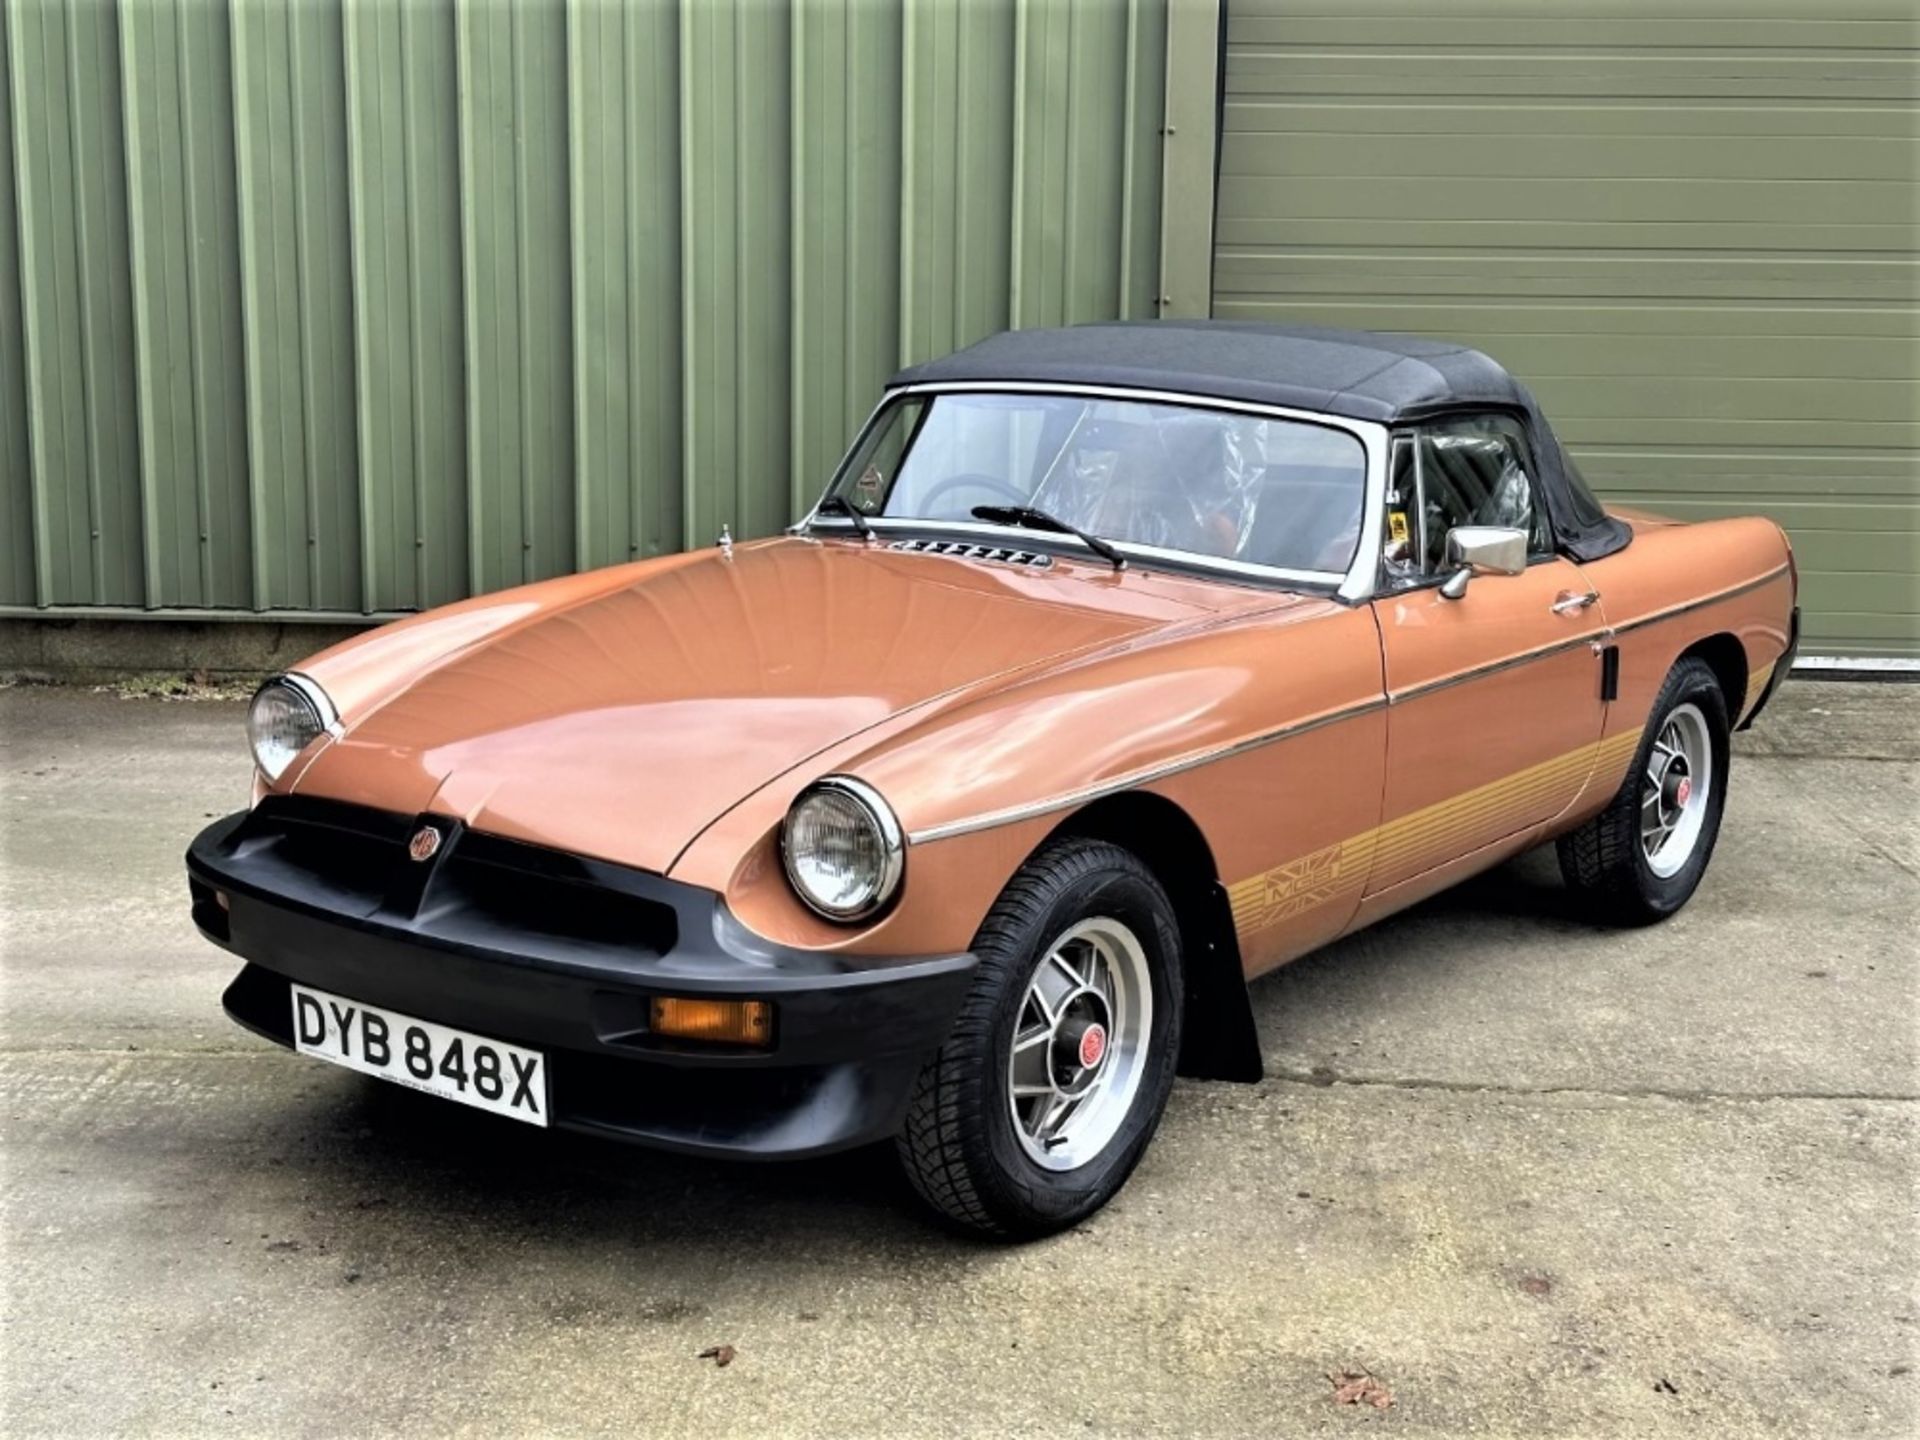 1981 MGB LE ROADSTER - offered at No Reserve Registration Number: DYB 848X Chassis Number: